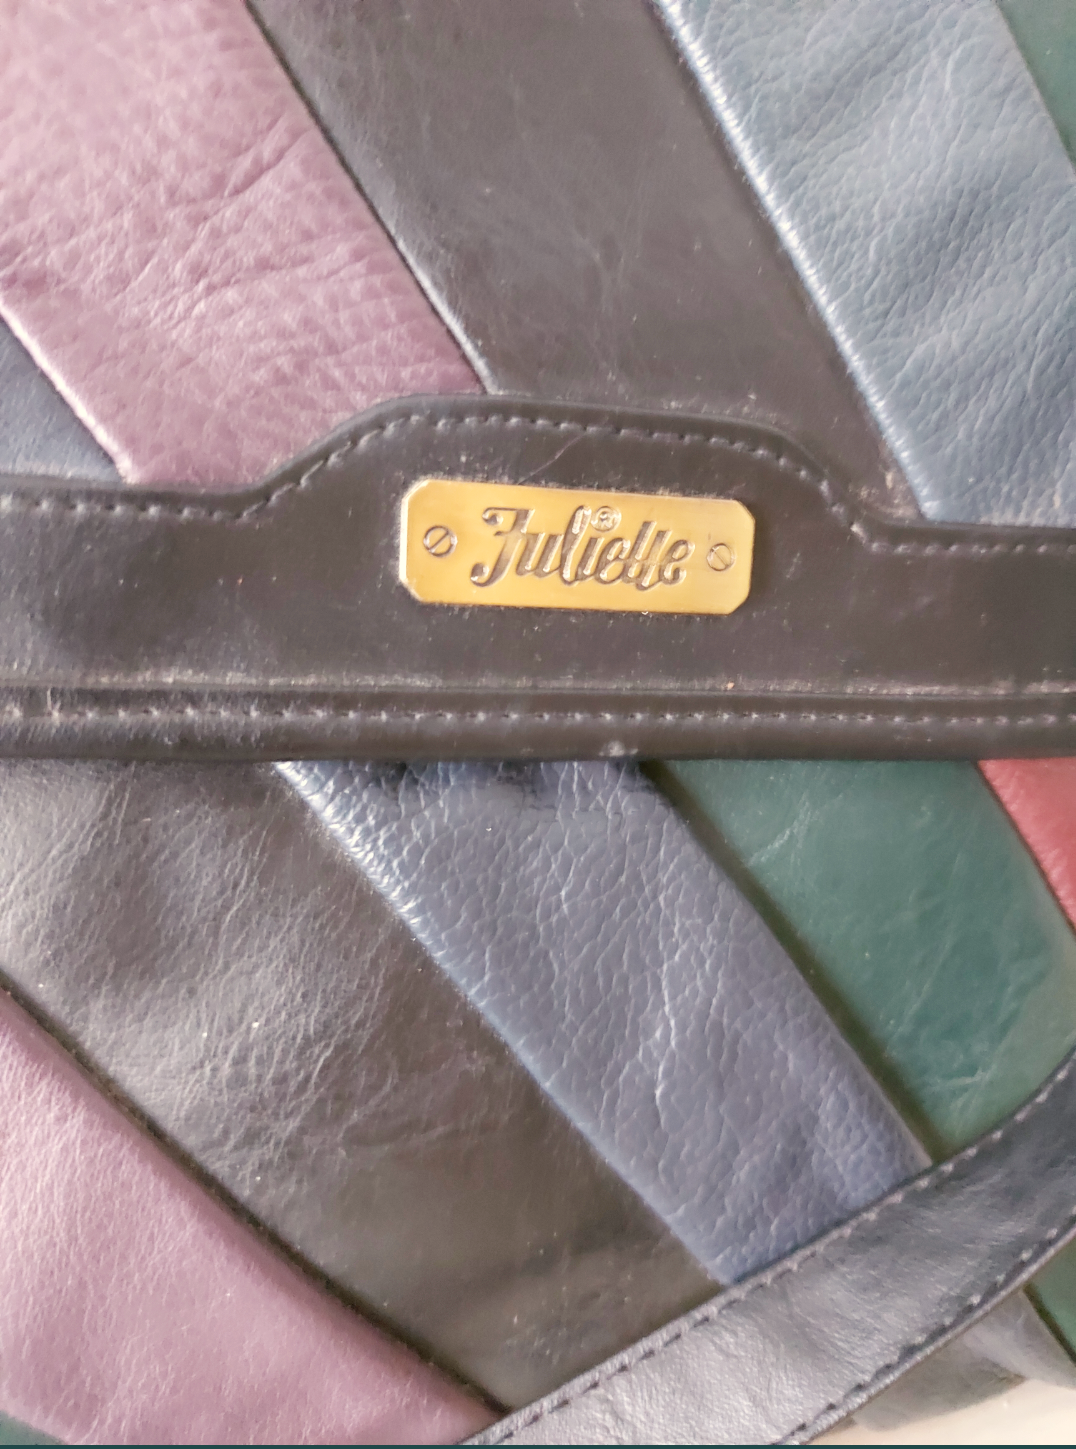 Multi Colour Leather Crossover Bag